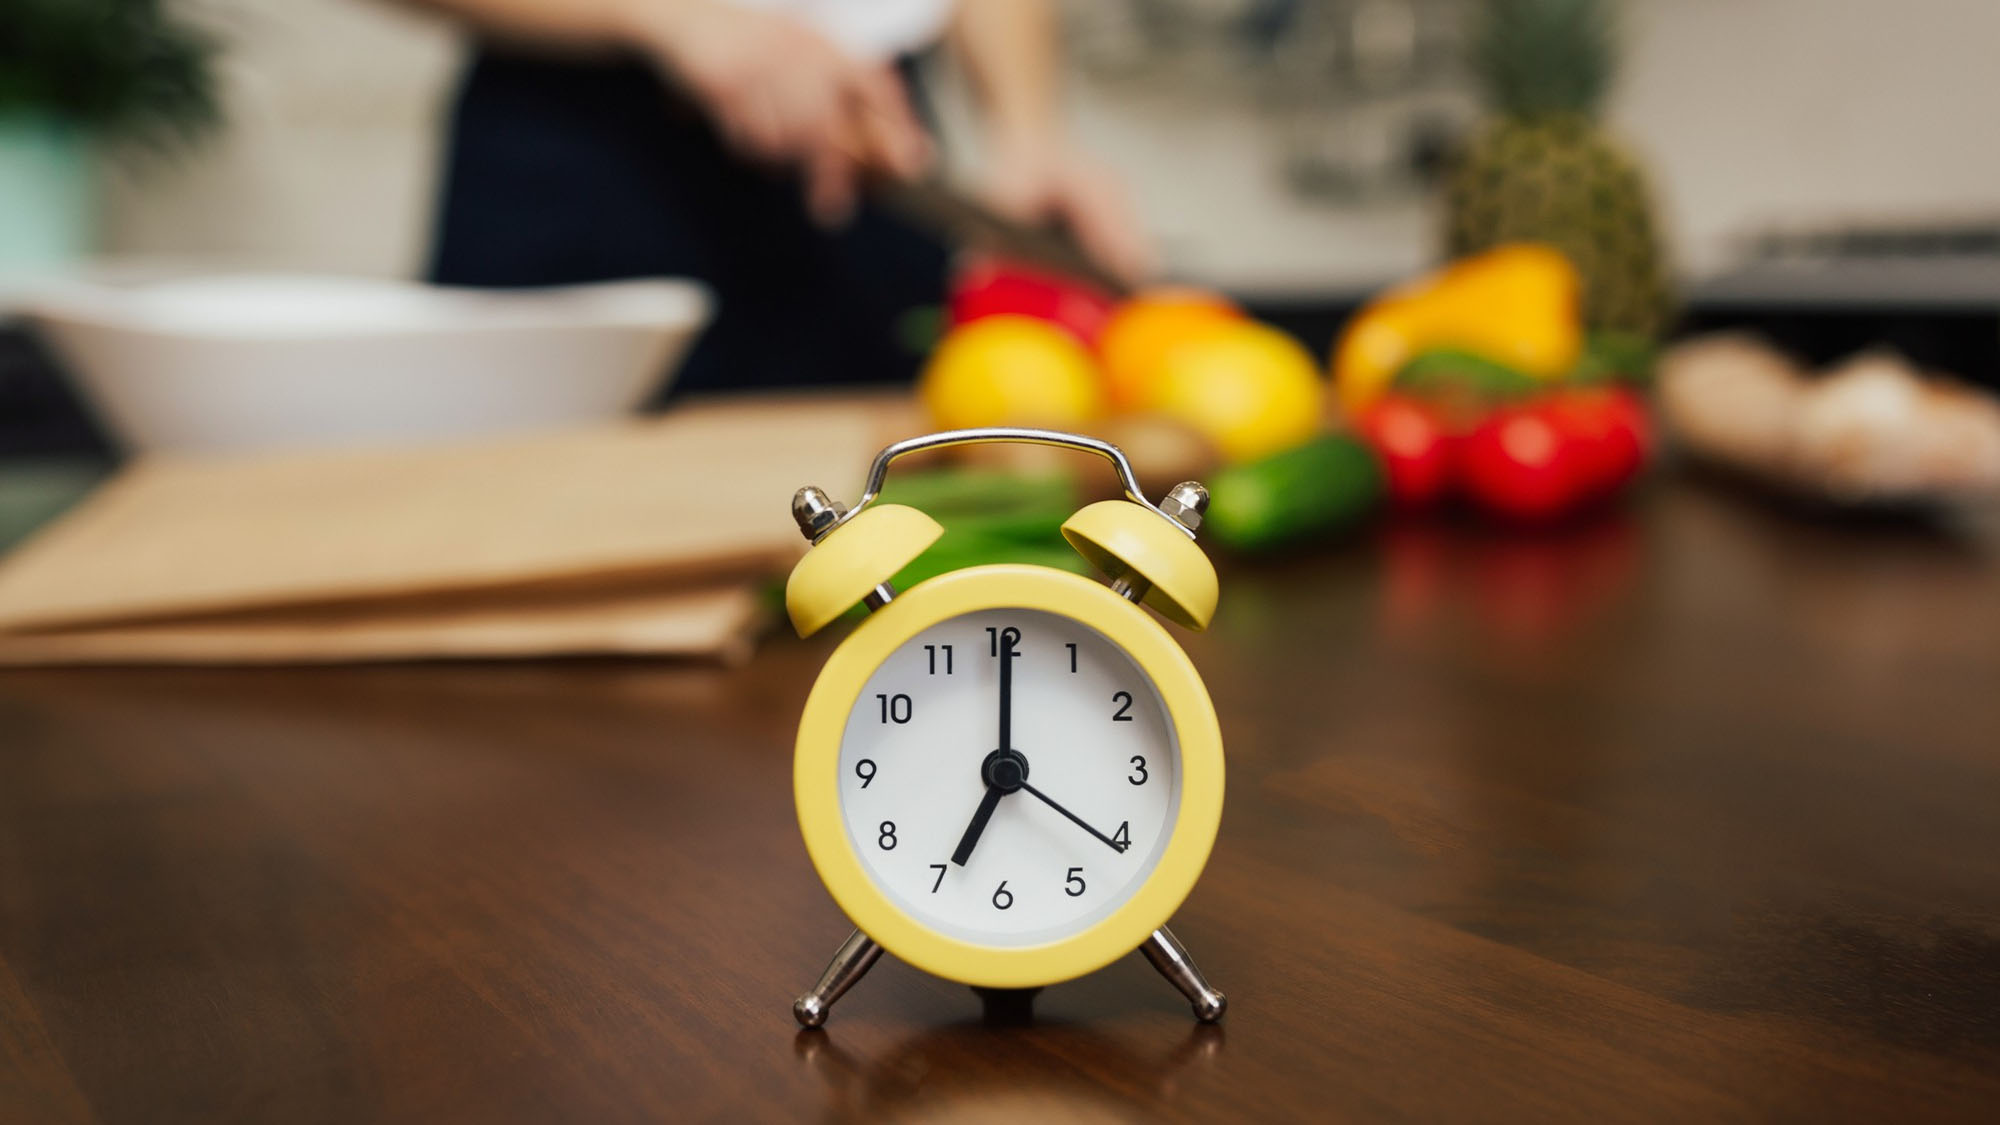 woman-saving-time-using-a-clock-while-preparing-meals